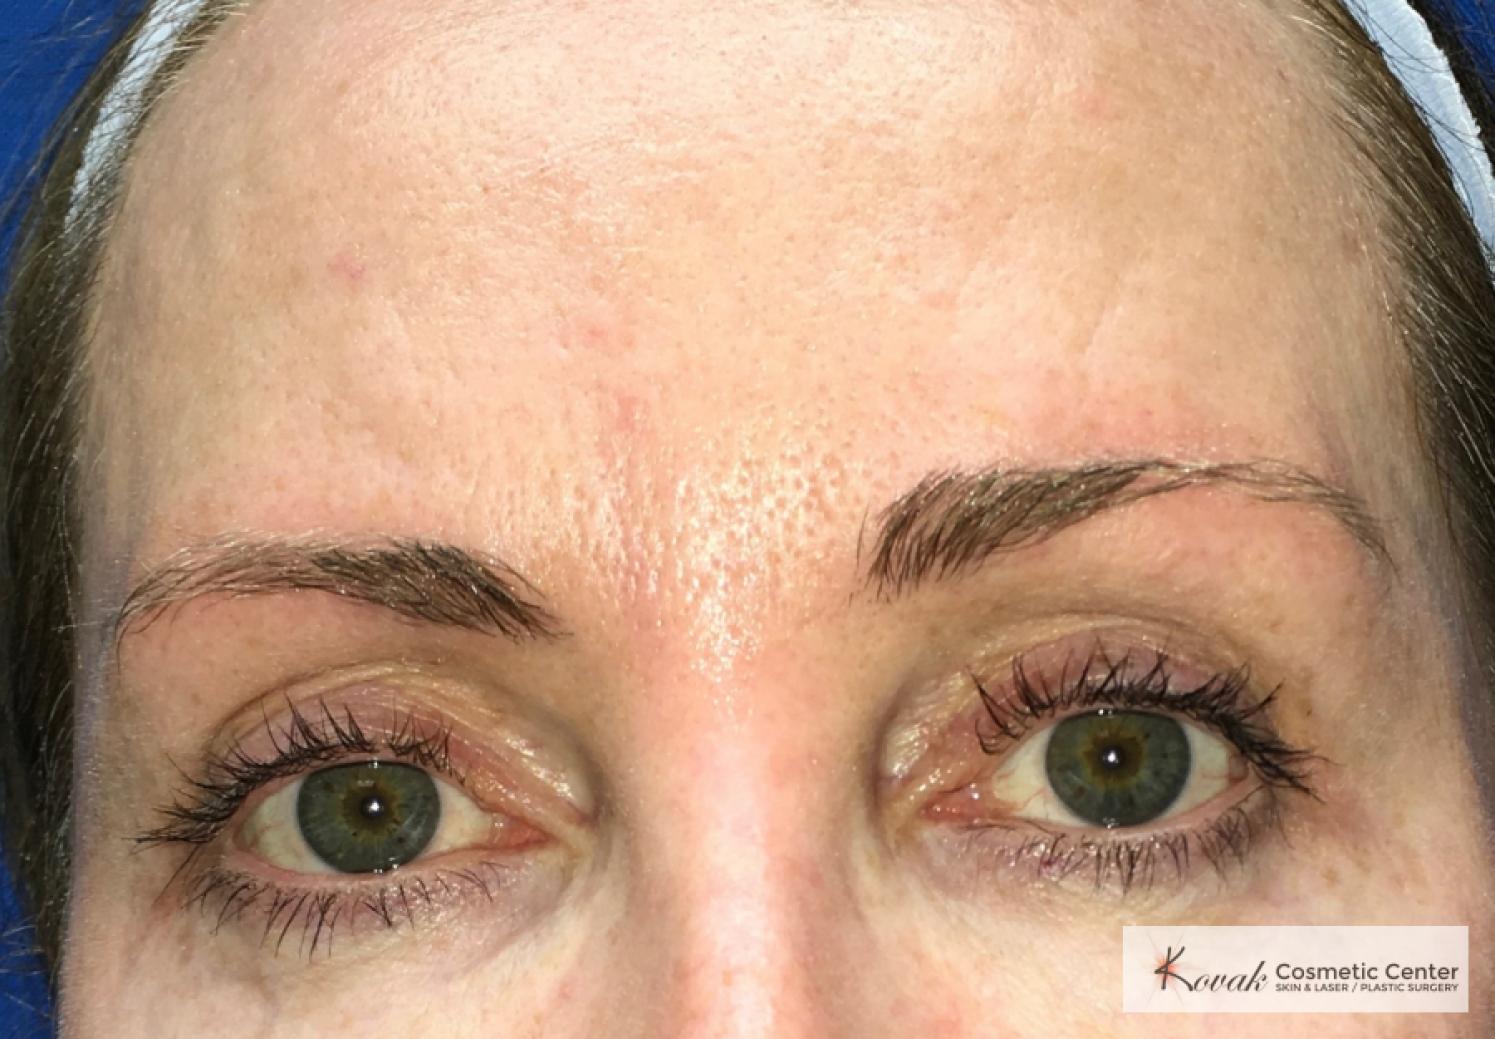 Upper eyelid treatment using Agnes on a 49 year old woman - After 1